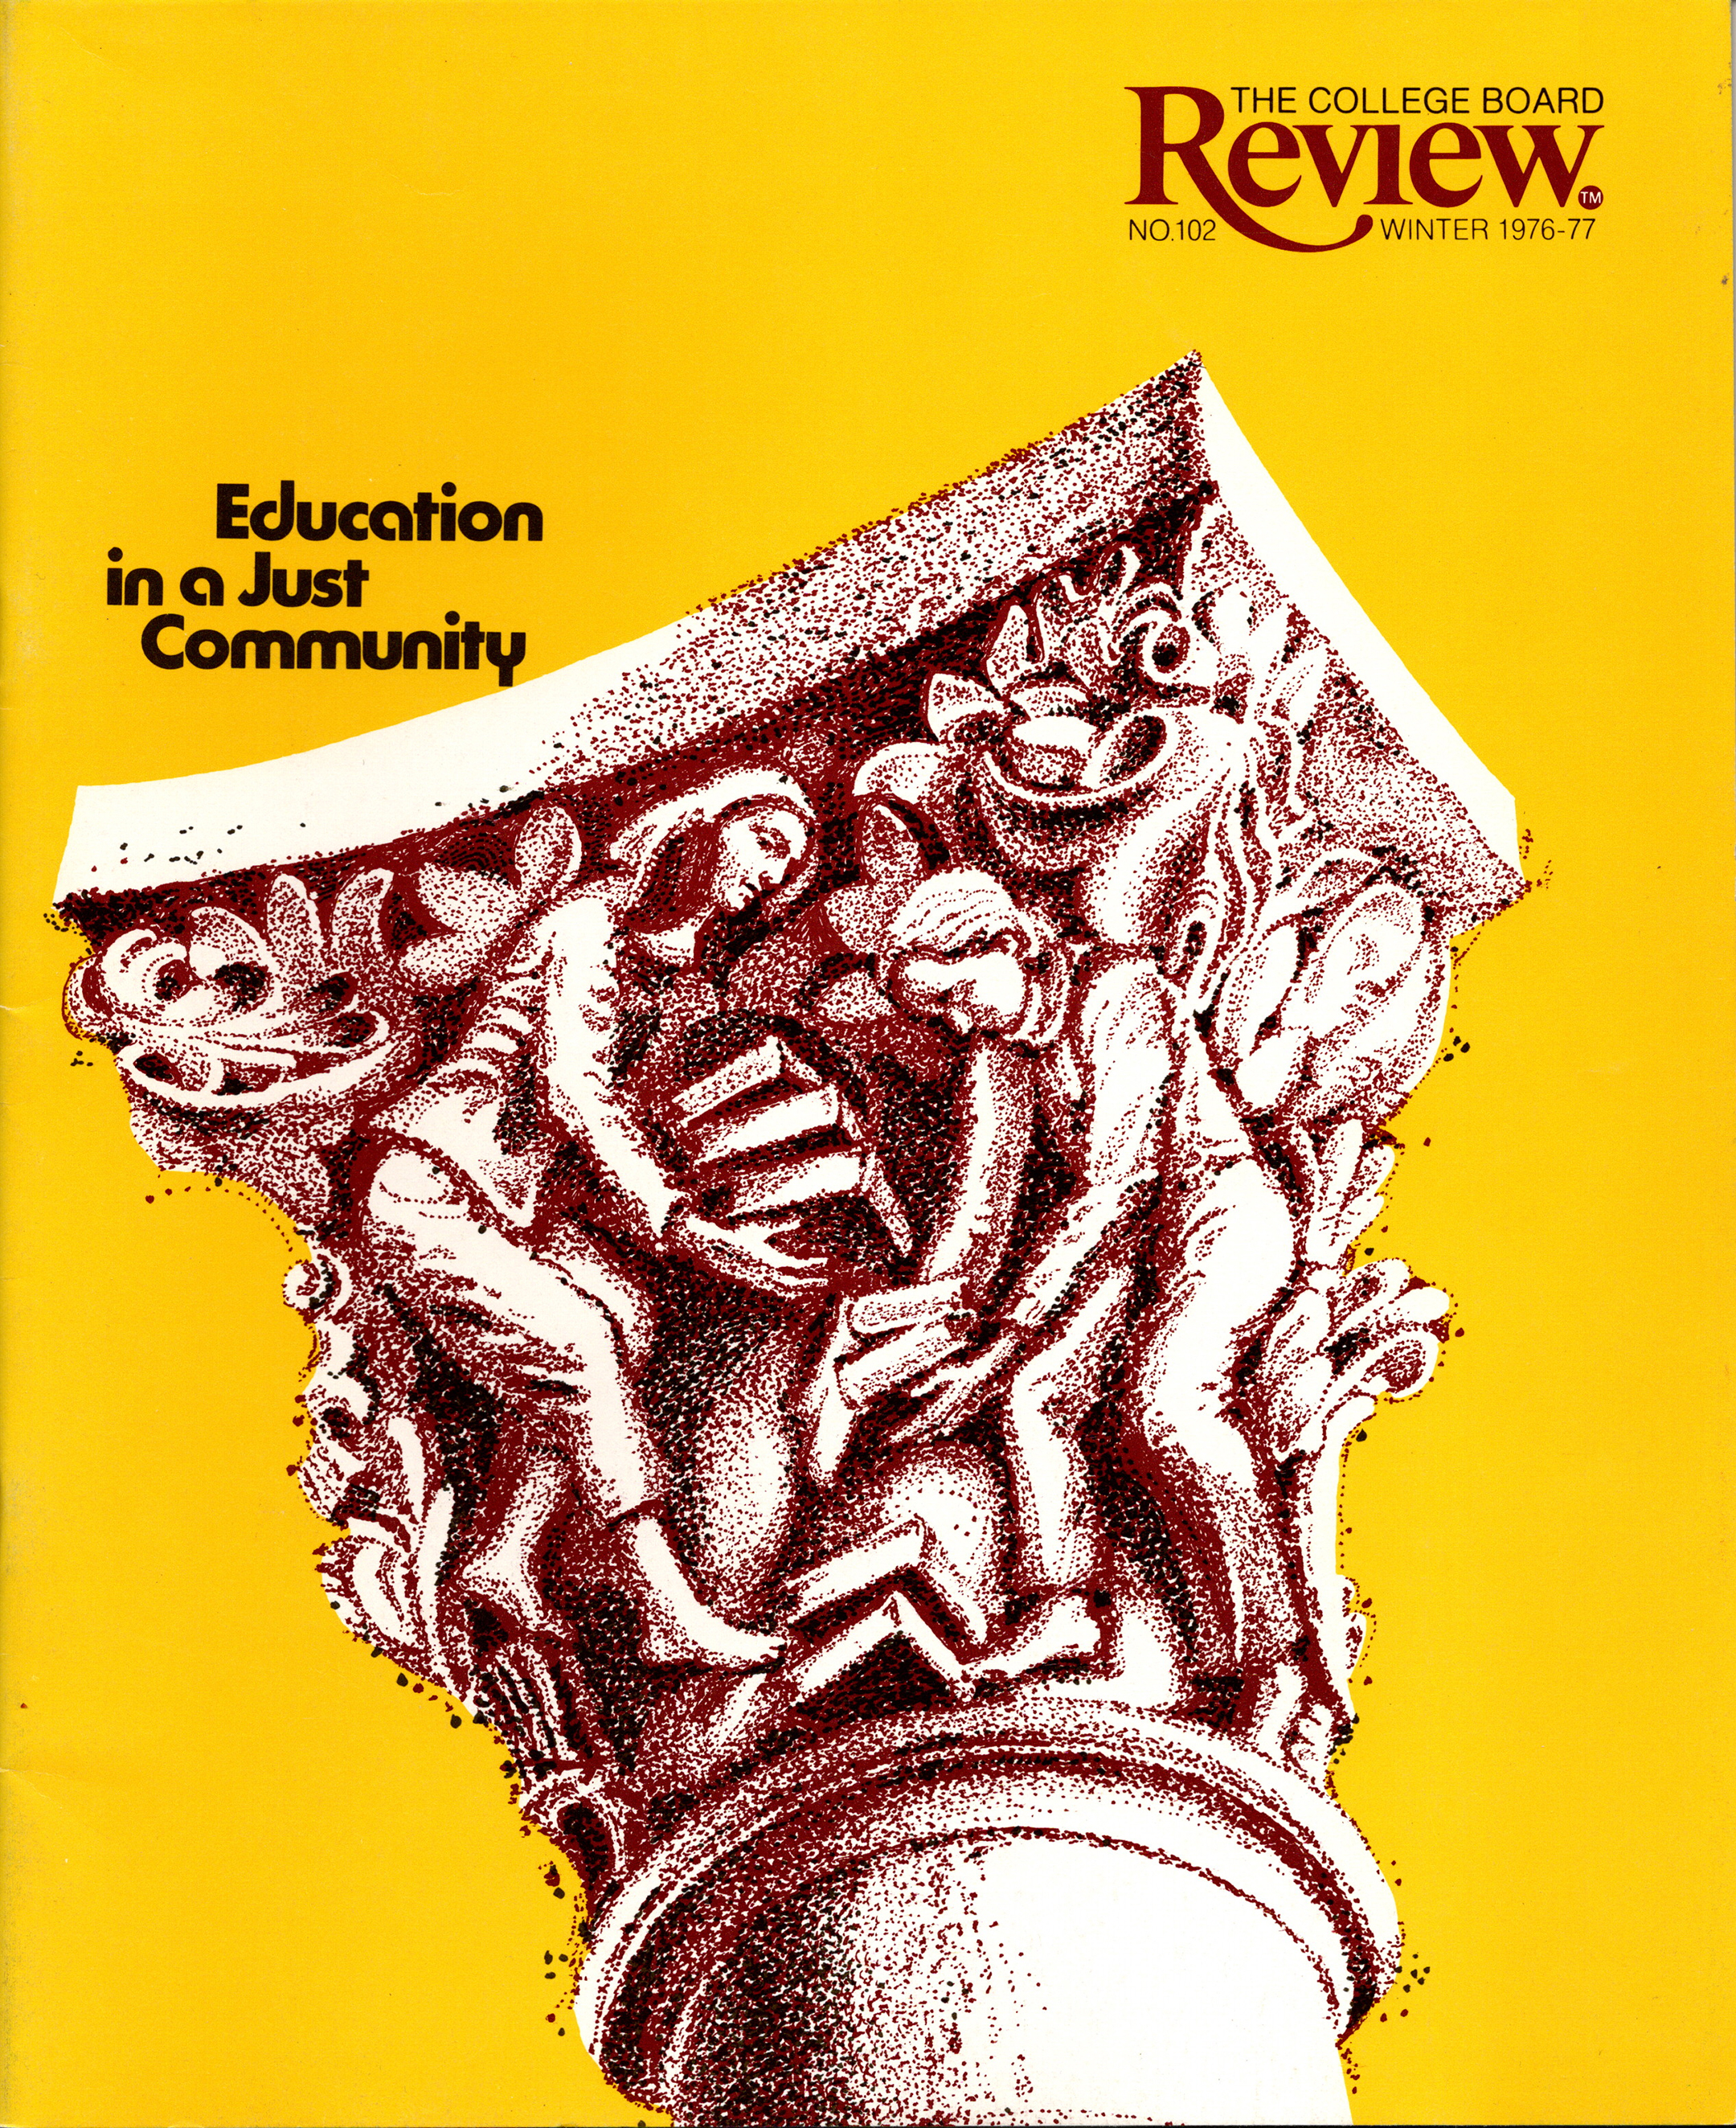 Cover of Winter 1976-77 issue of College Board Review with an illustration of a column with students carrying books carved into the top against a yellow background with the words education in a just community at the top